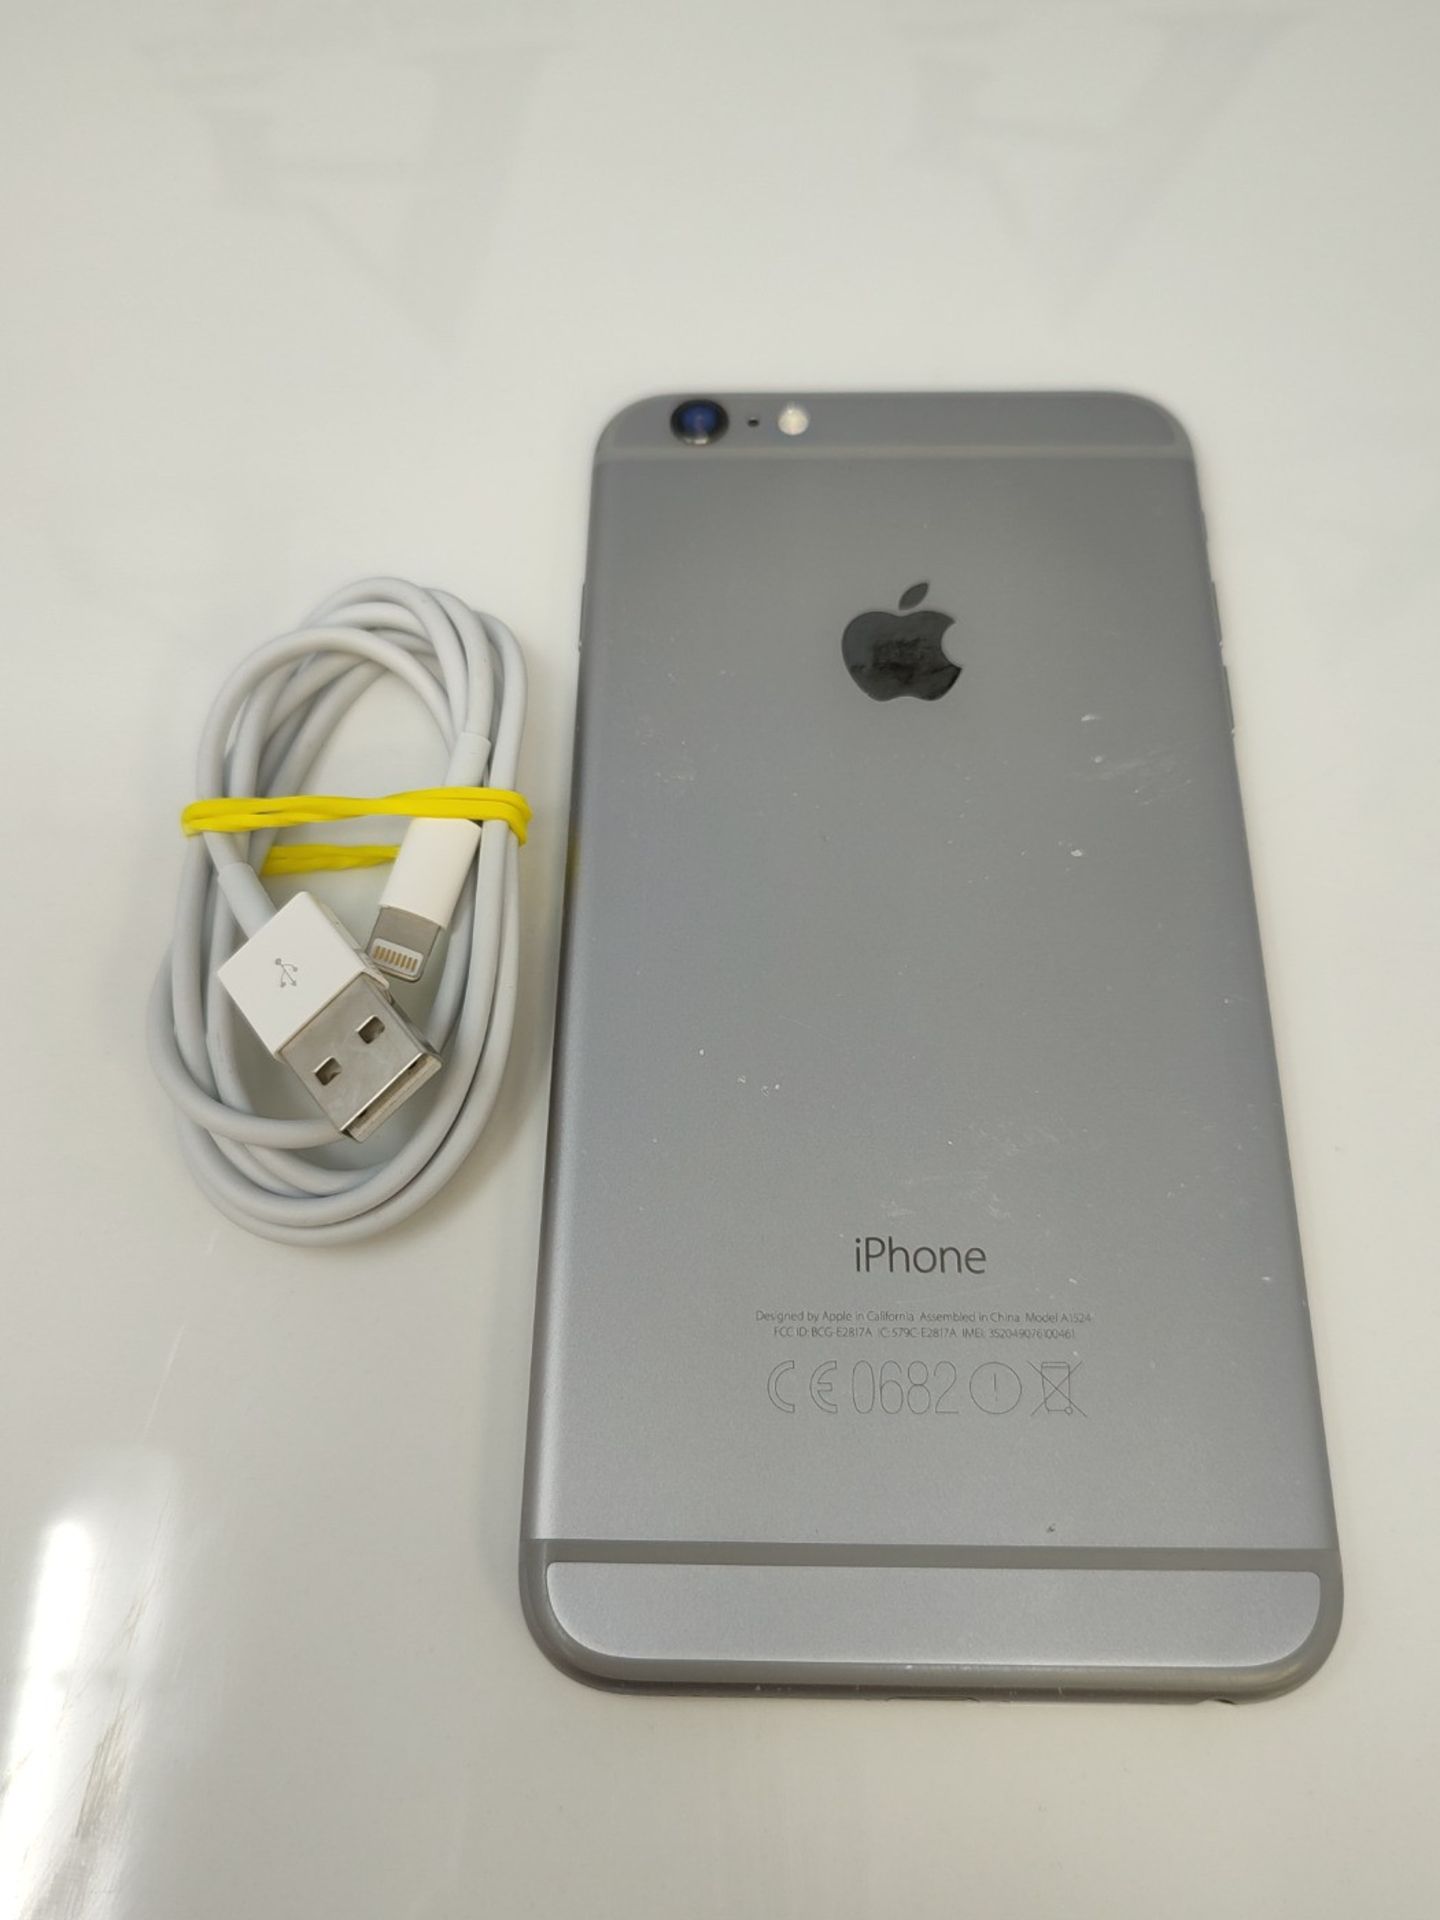 Apple iPhone 6 Plus A1524, 16GB - Image 2 of 2